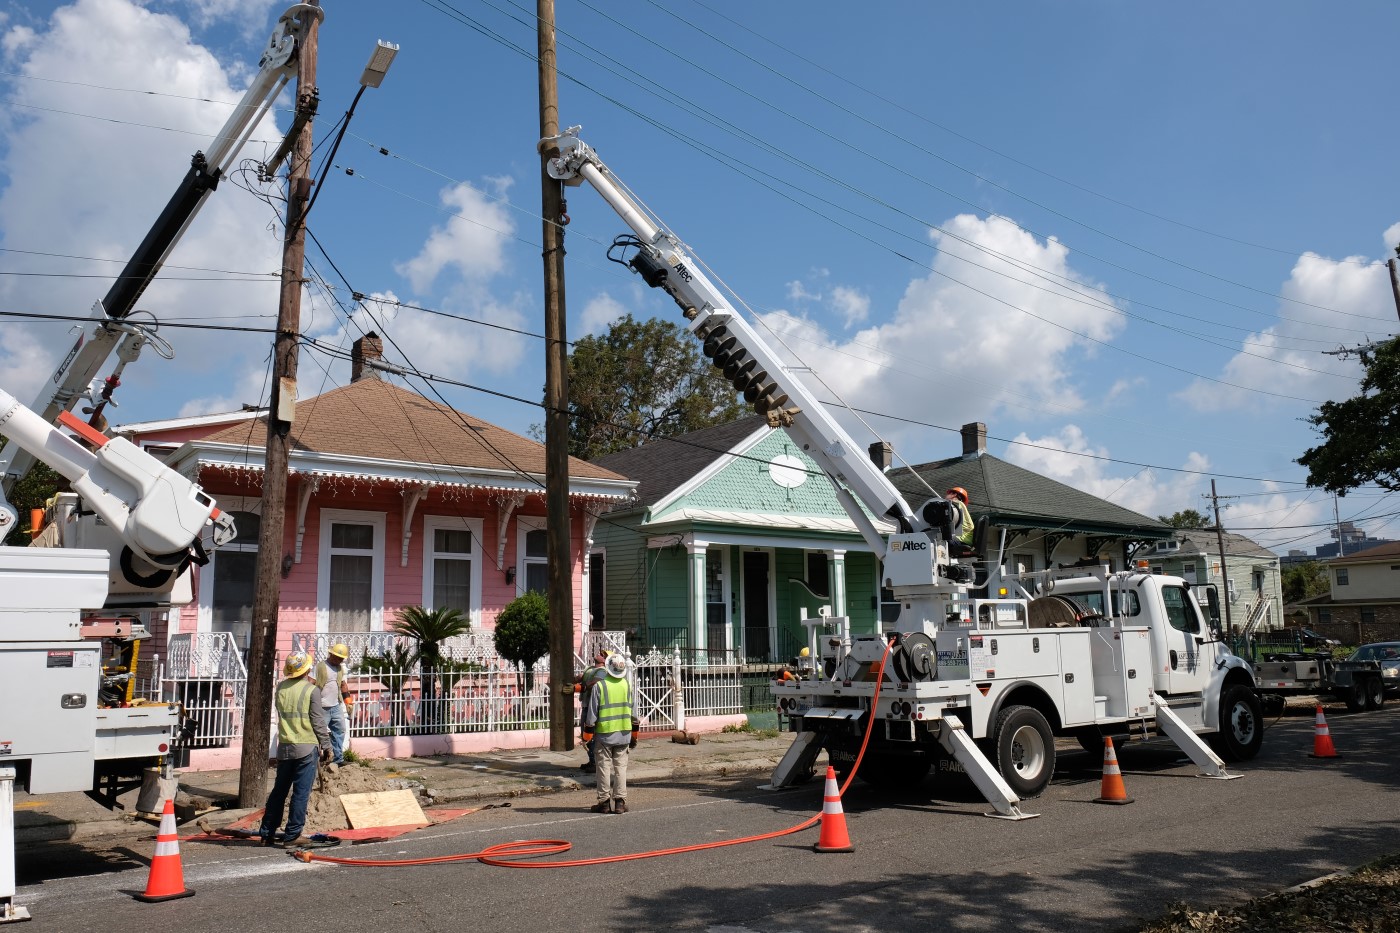 Crews repairing downed power lines in The Garden District of New Orleans Louisiana, after Hurricane Ida. Troy Fields